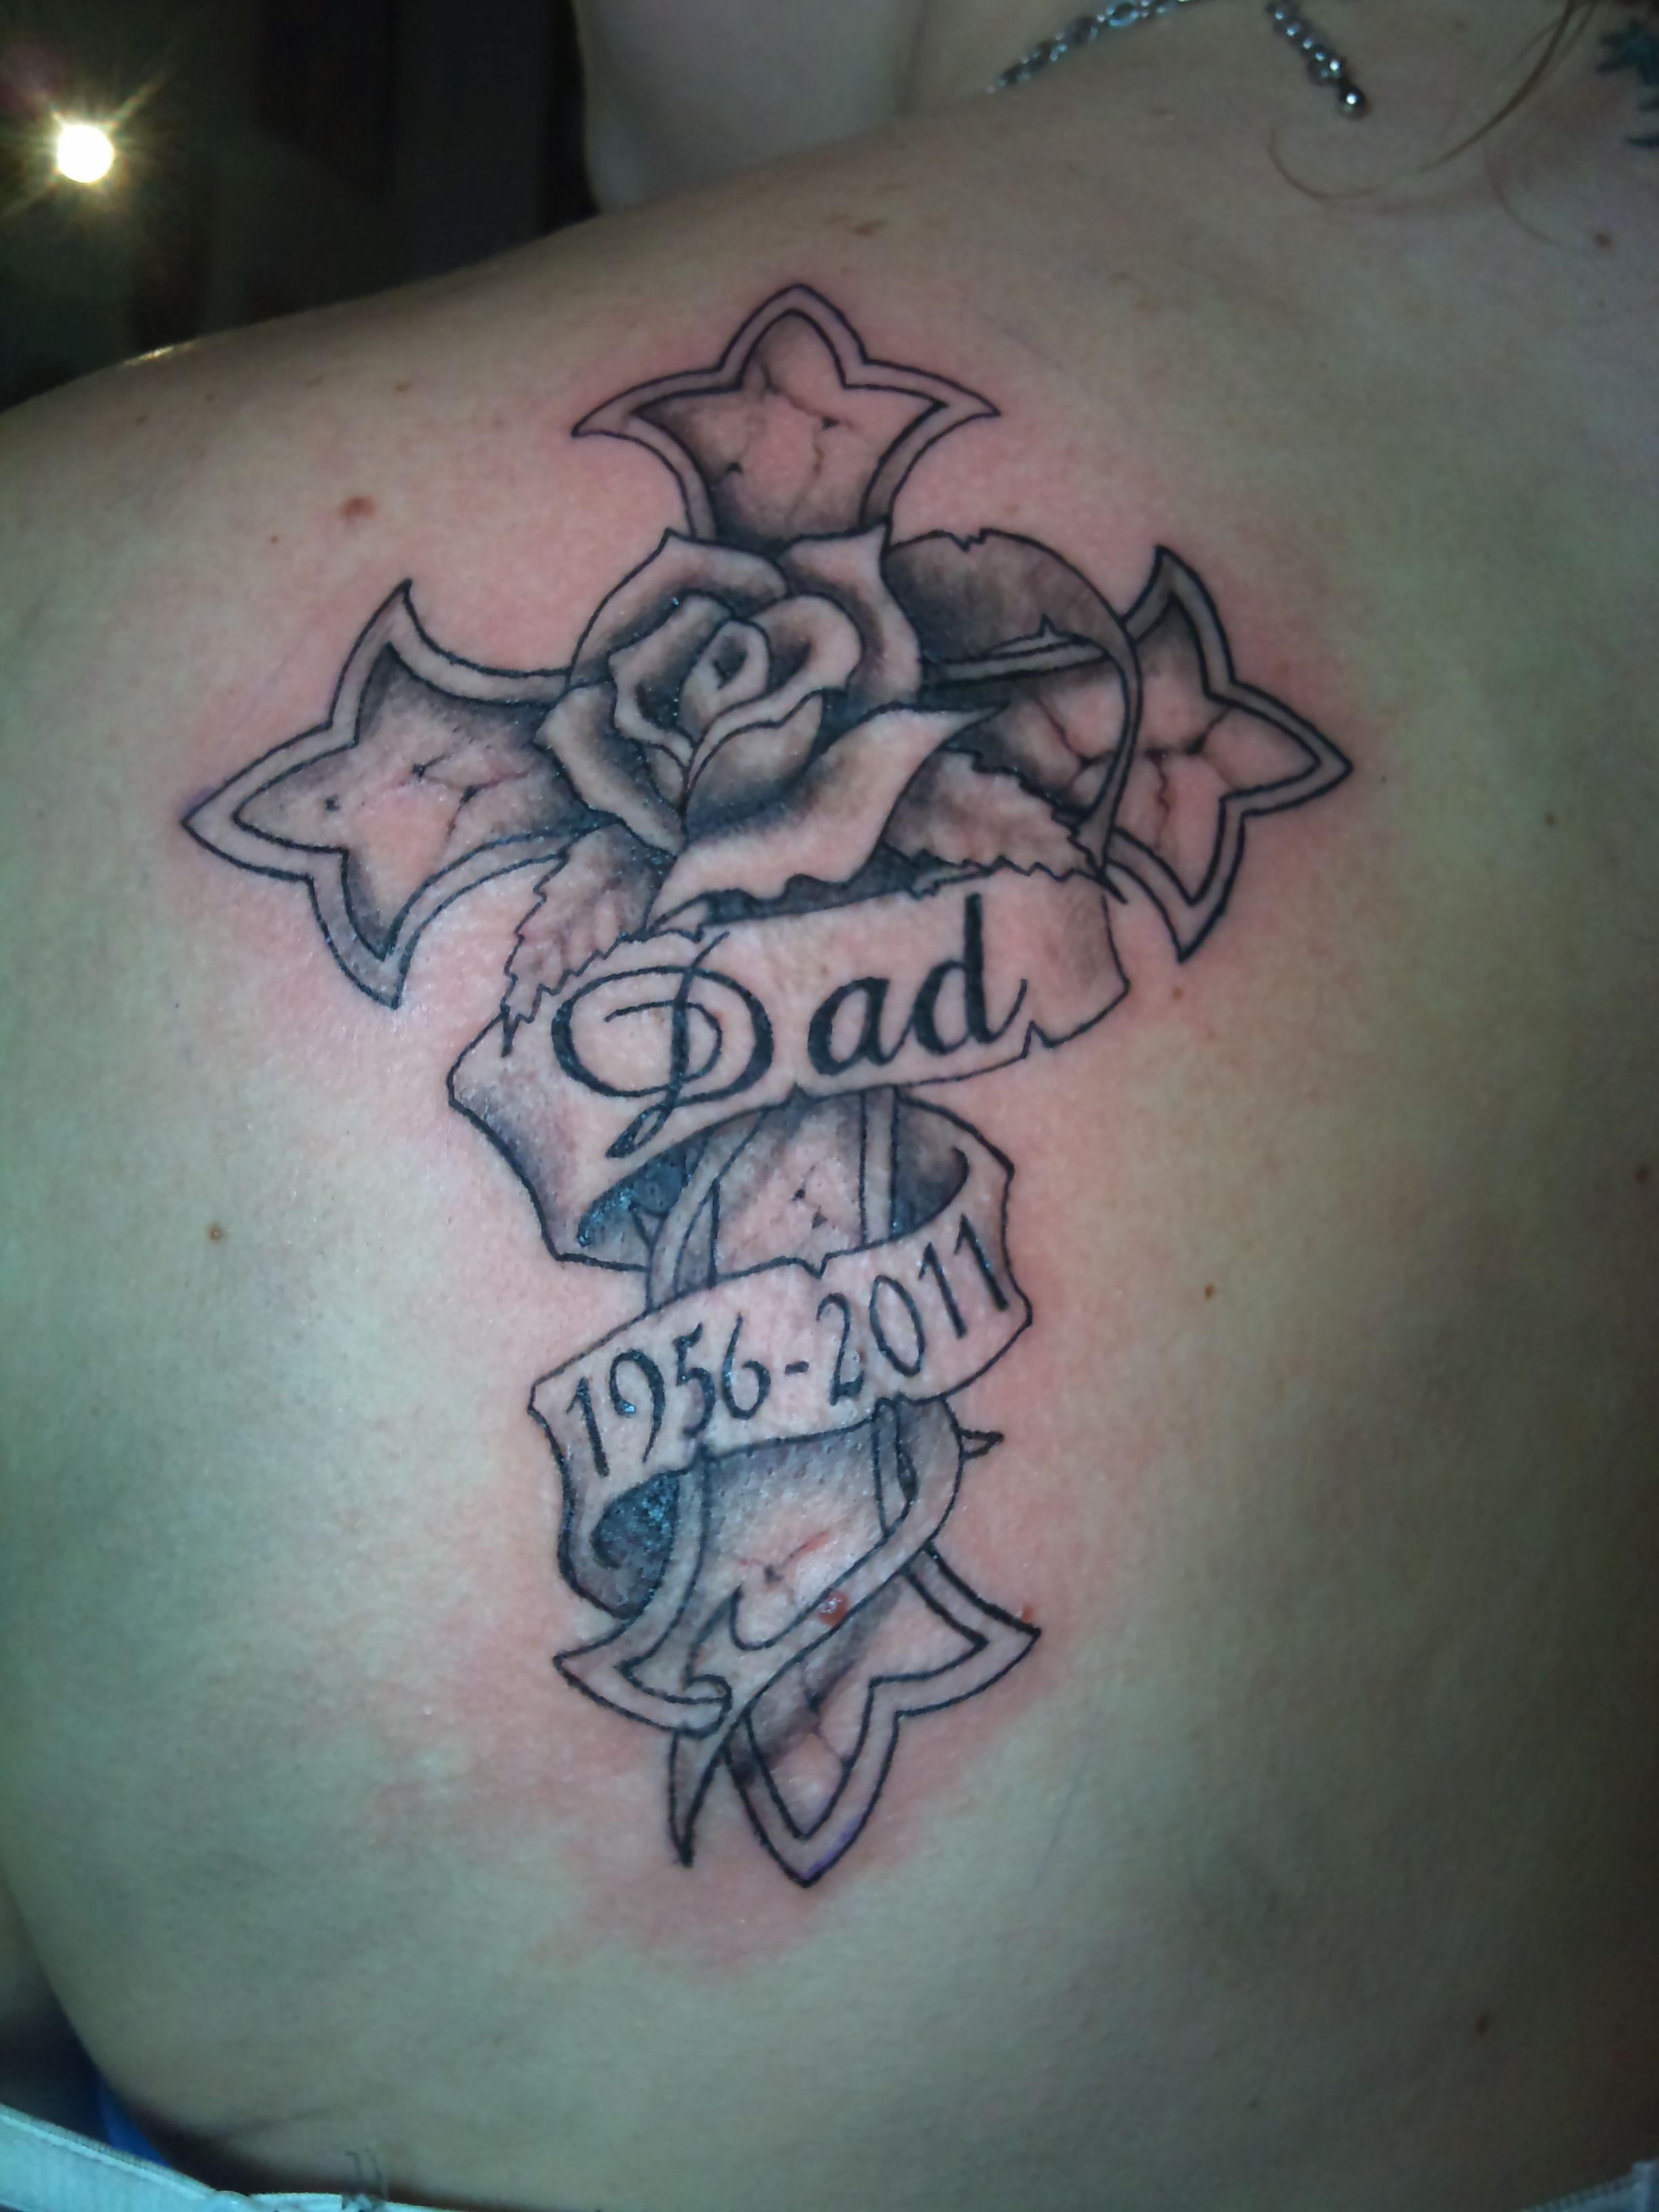 Cross Tattoos With Banners Designs And Ideas Tattoo Memorial regarding sizing 2448 X 3264